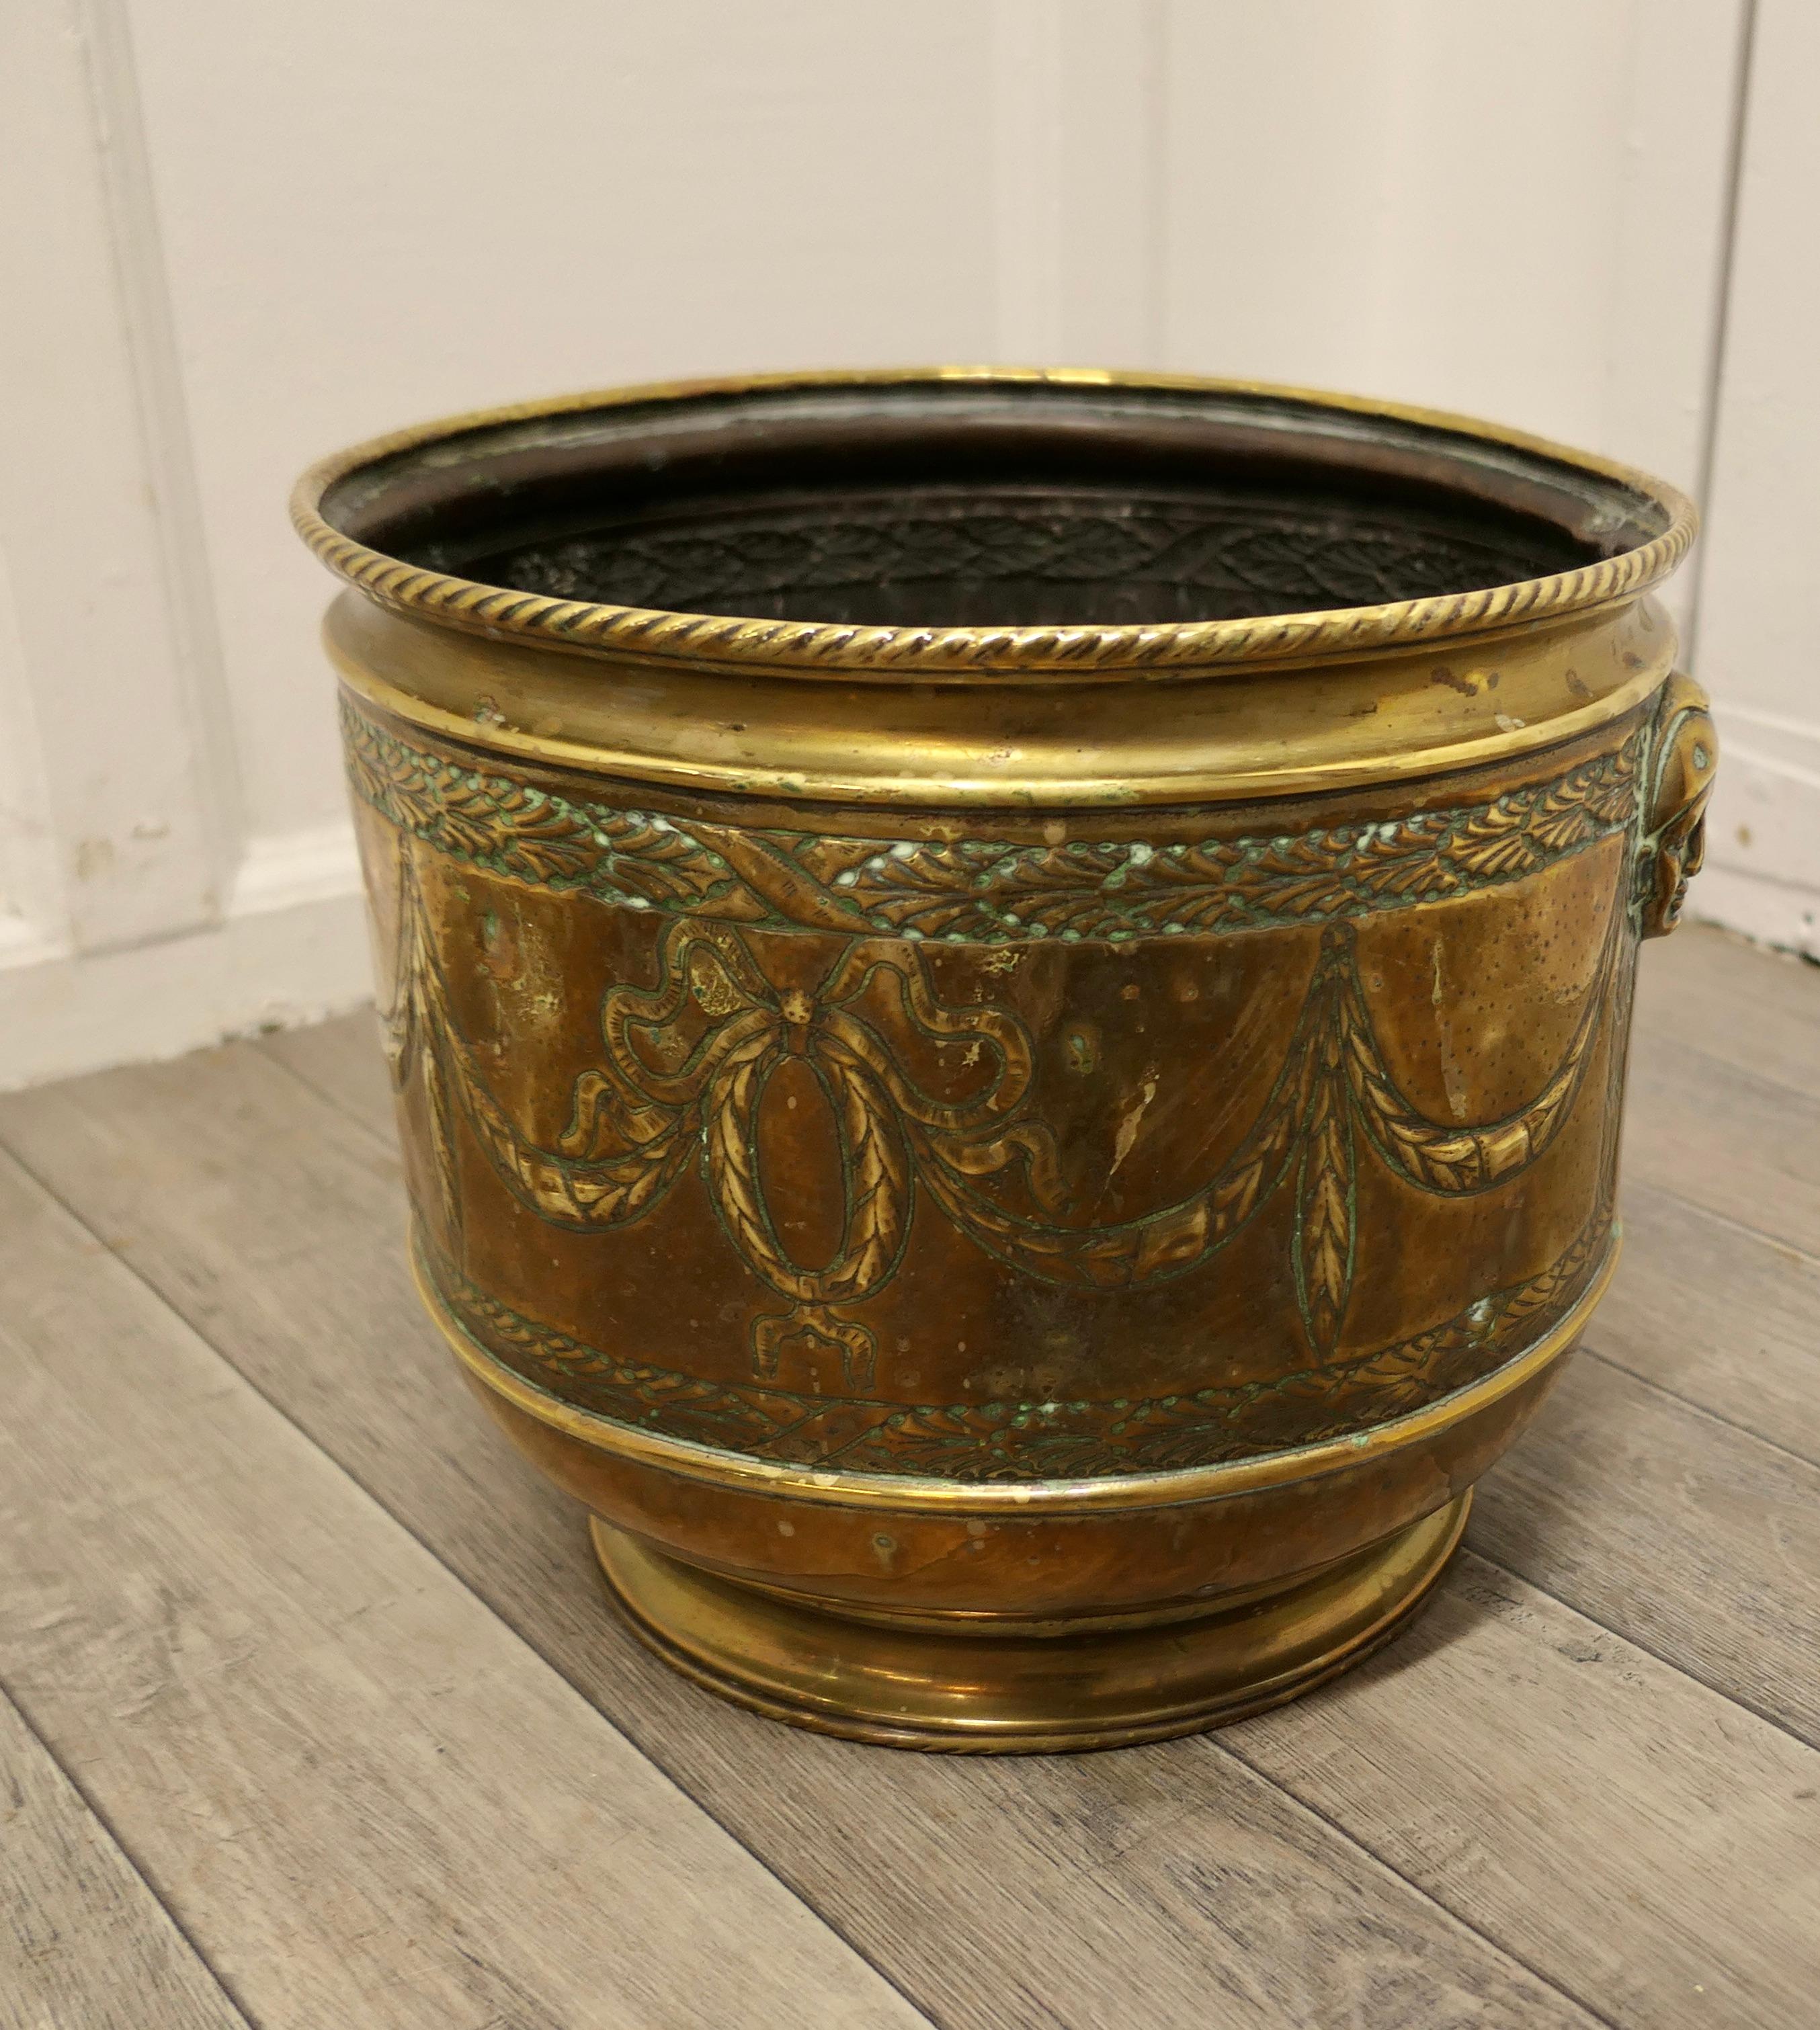 Large 19th century brass jardinière with faces

This is a good quality piece of solid brass craftsmanship, the Jardinière has a rolled rope top edge and very unusual masks, one on each side
There are decorative swags around the planter in the